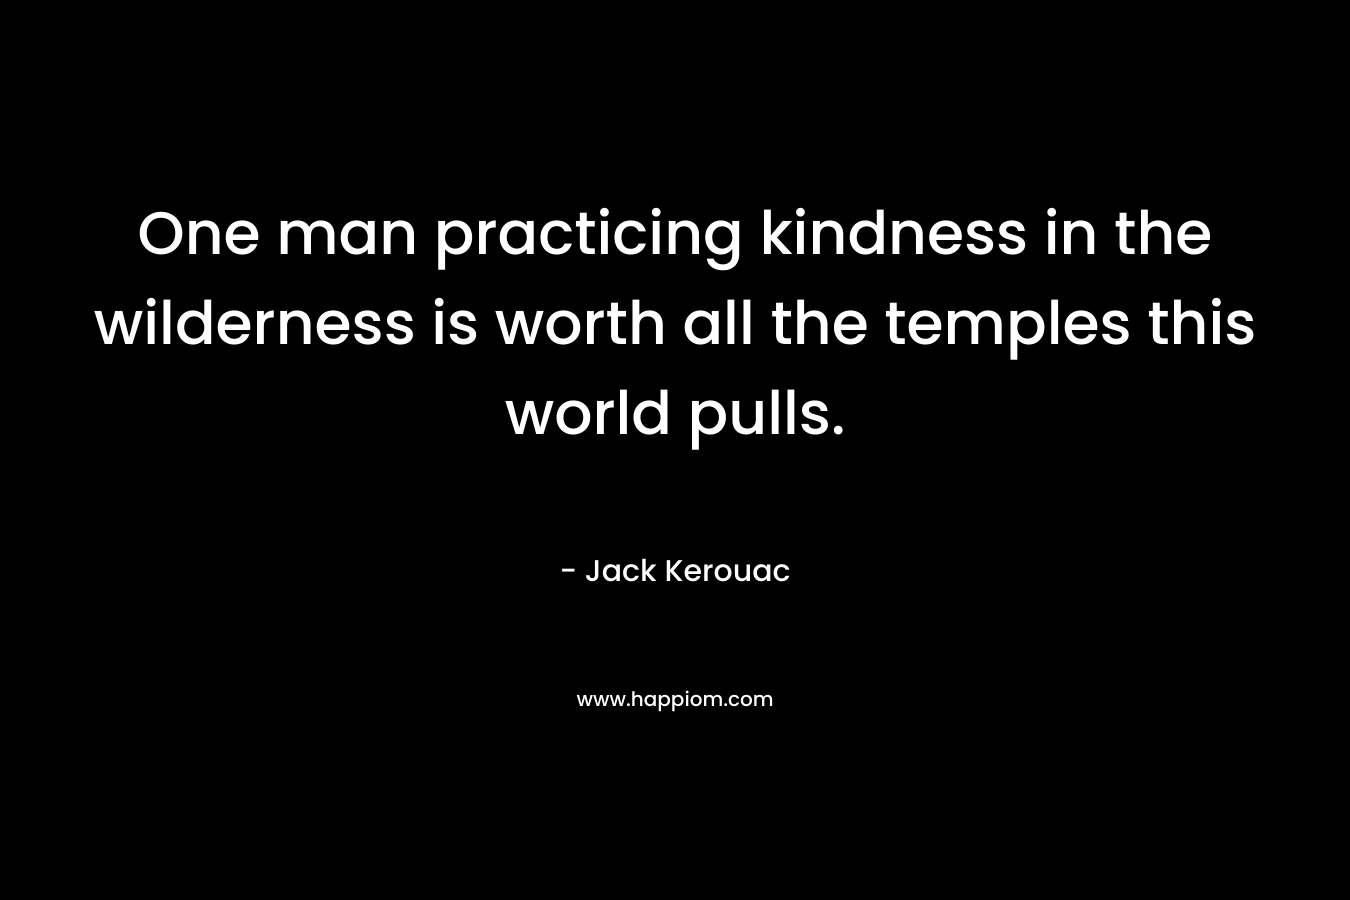 One man practicing kindness in the wilderness is worth all the temples this world pulls. – Jack Kerouac